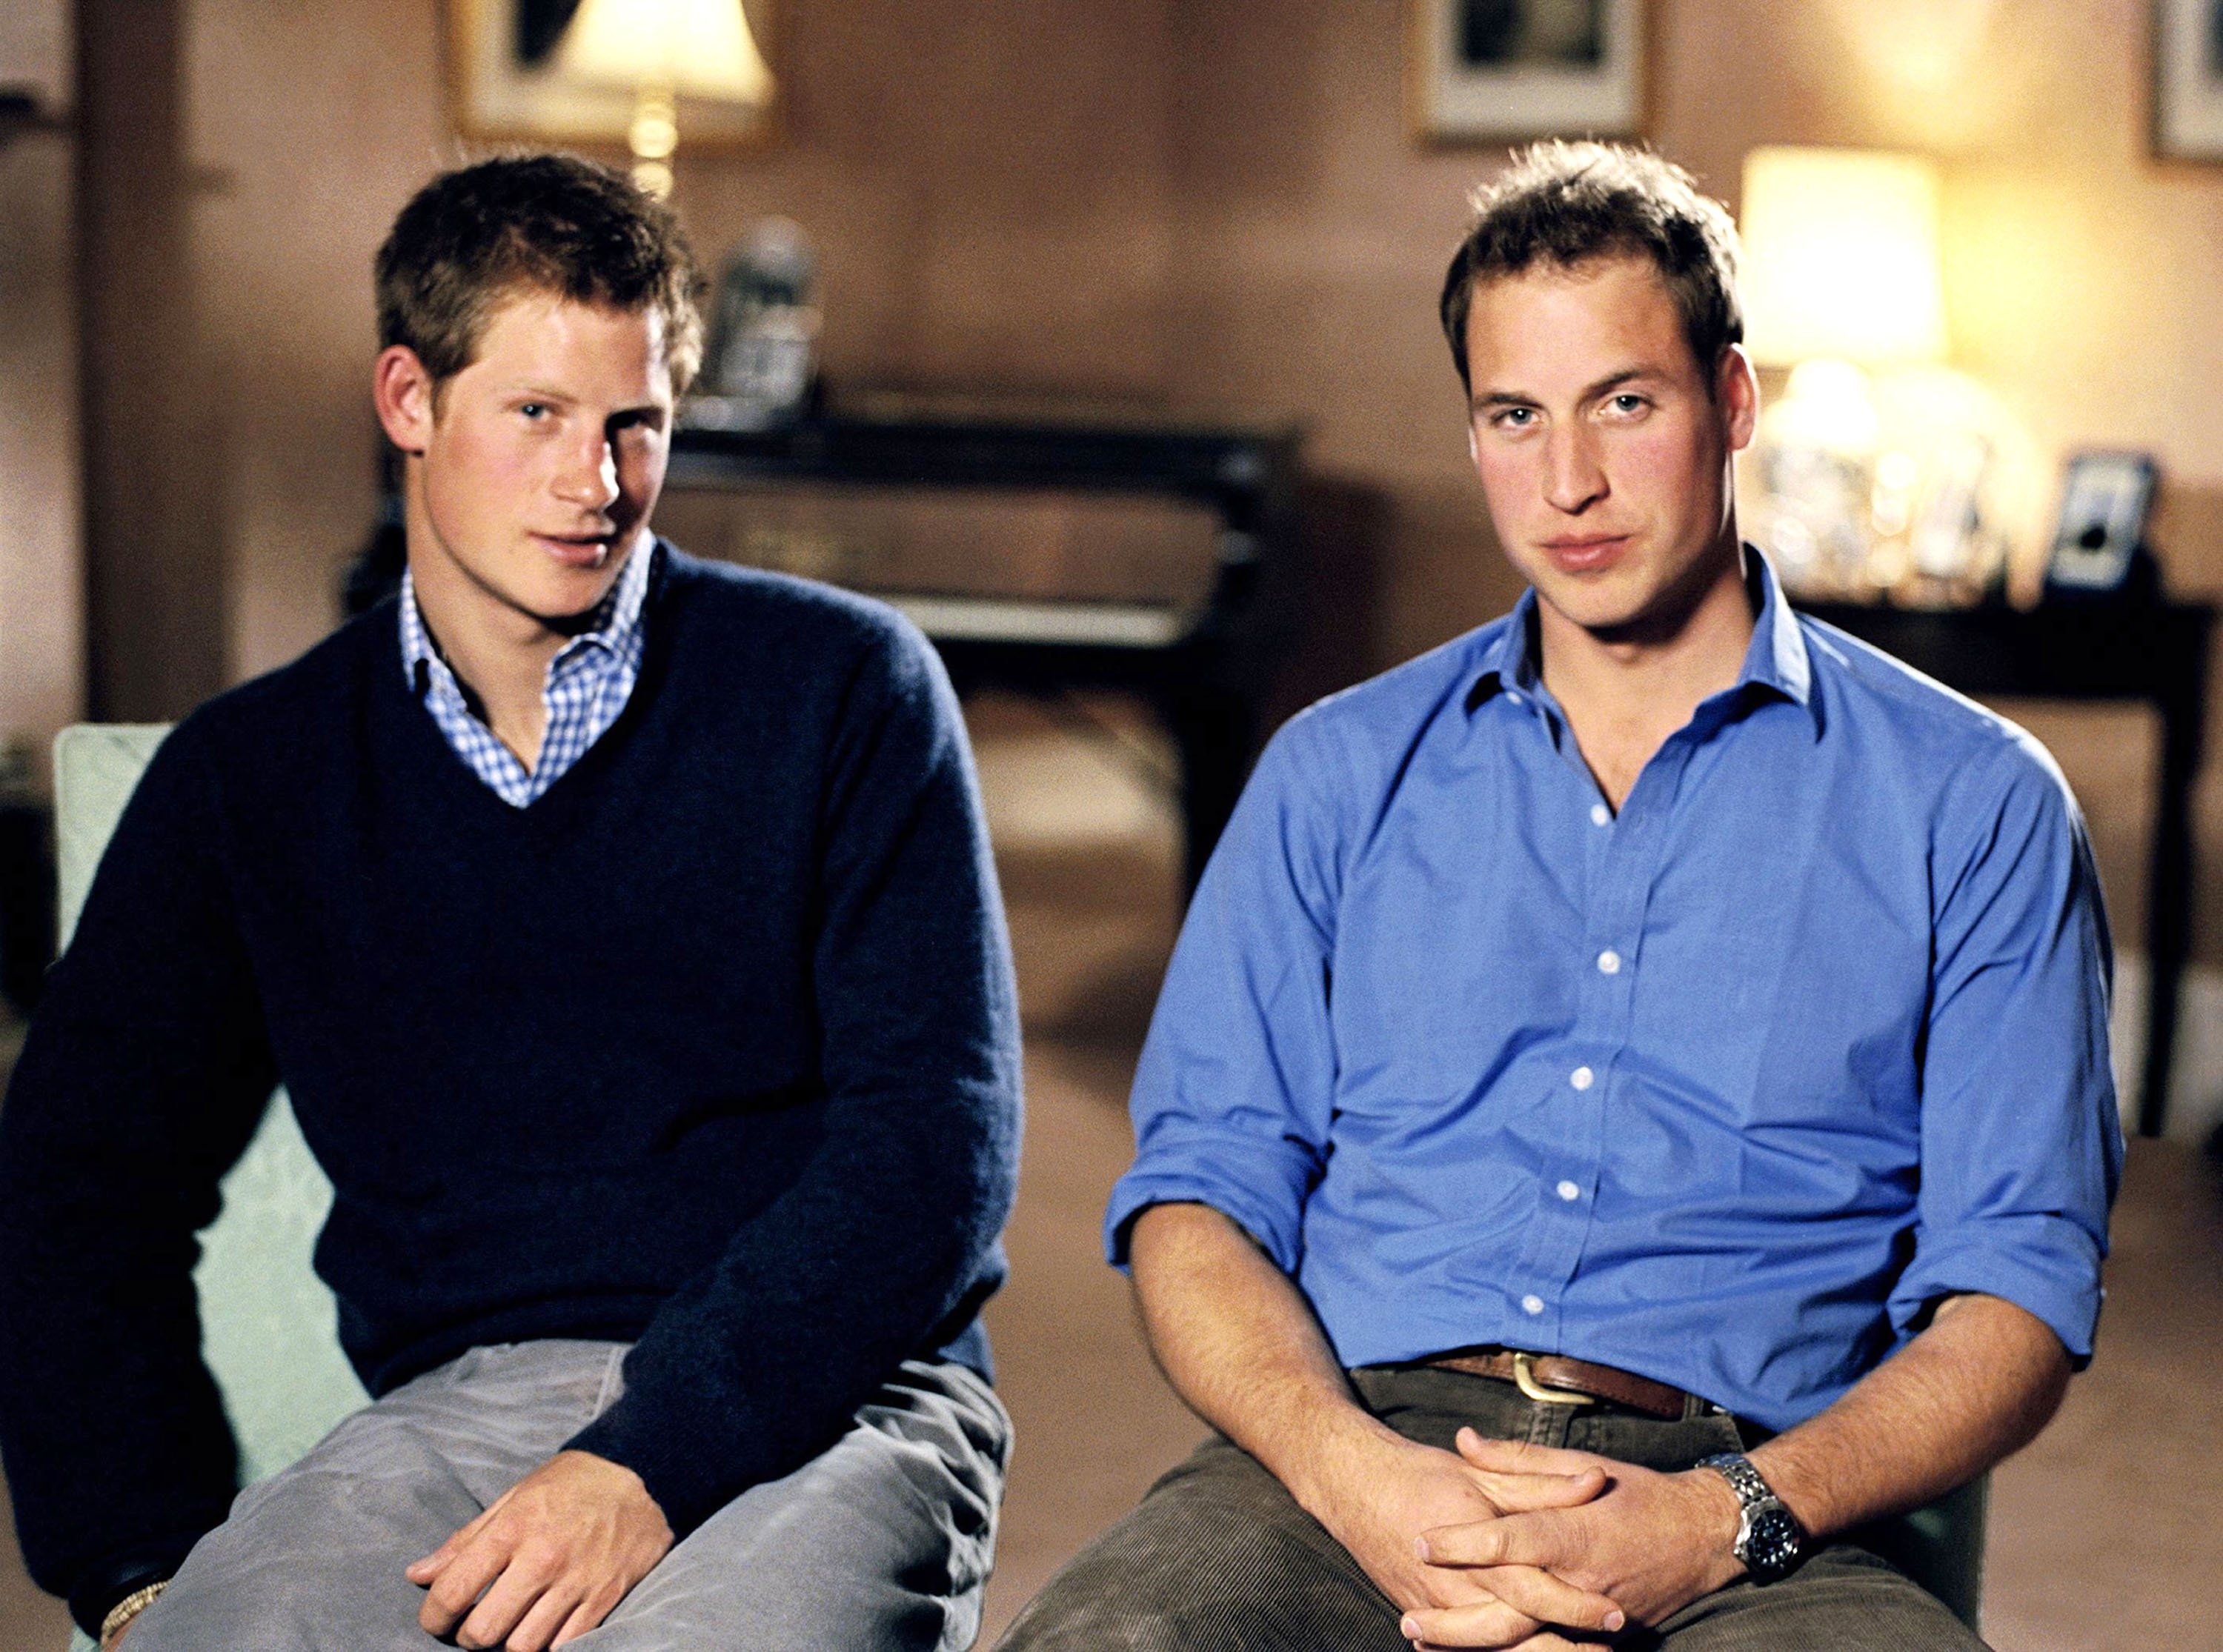 Prince Harry and Prince William speaking about a concert to mark the anniversary of Princess Diana's death